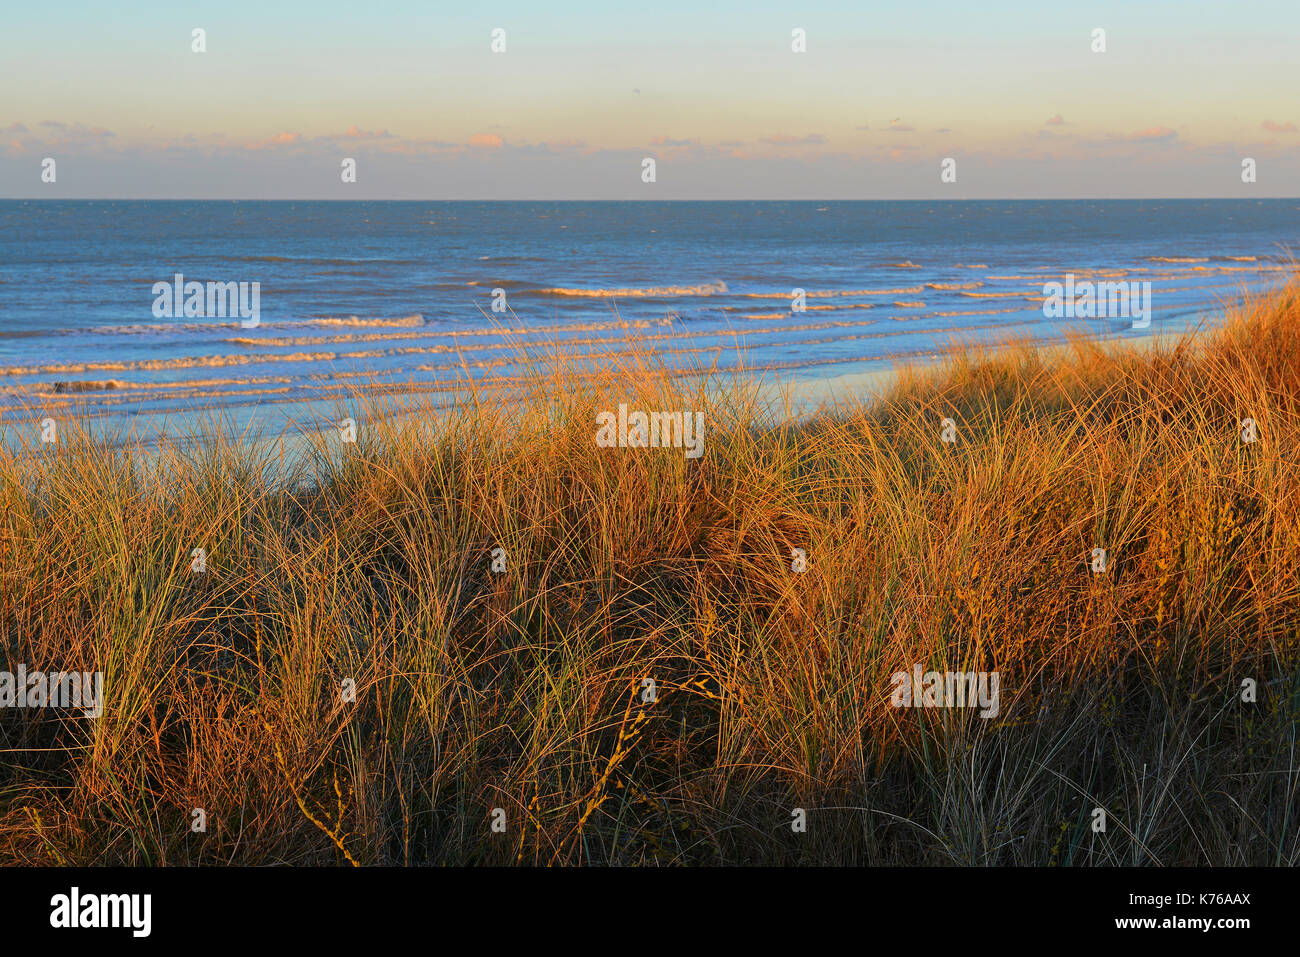 Landscape of the sand dunes of Ostend with dune grass illuminated at sunset with the North Sea in the background, West Flanders, Belgium. Stock Photo